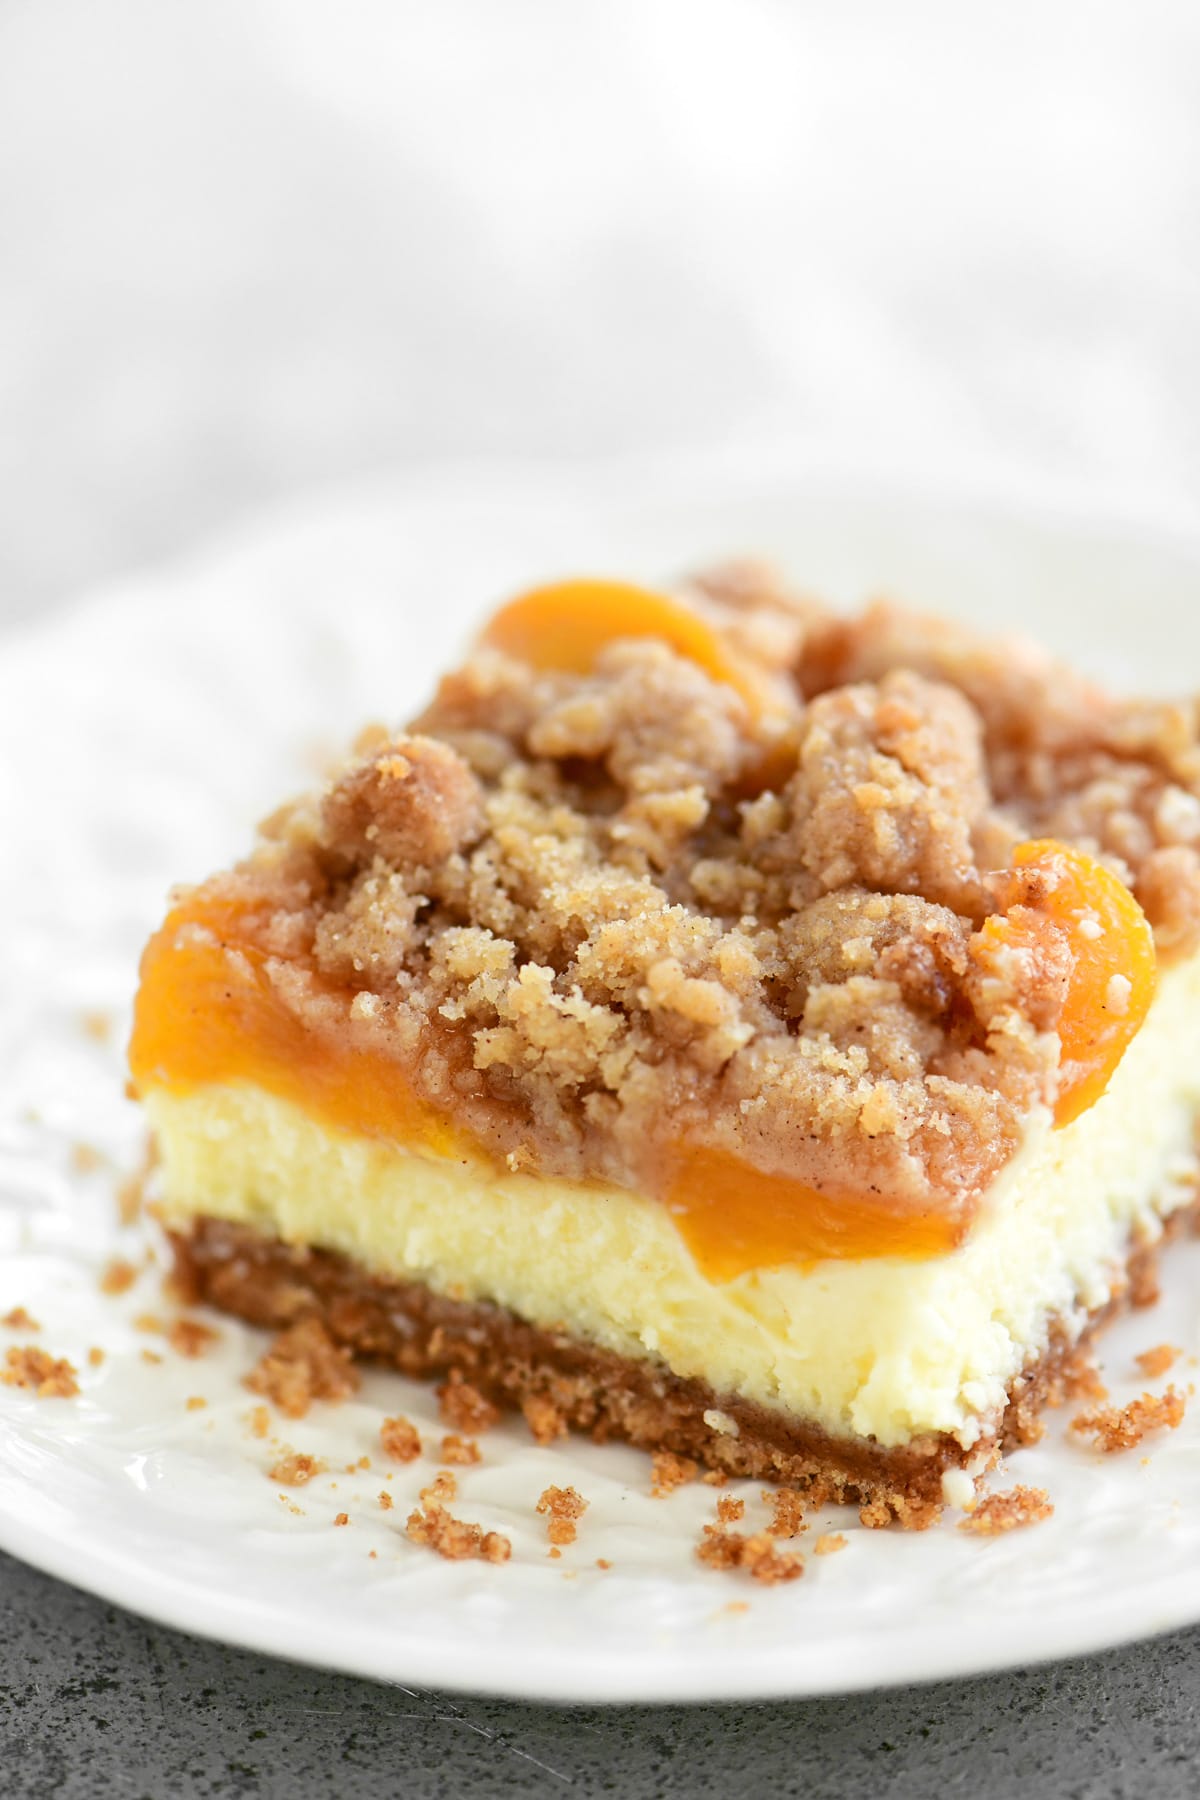 A slice of peach cobbler cheesecake on a plate.